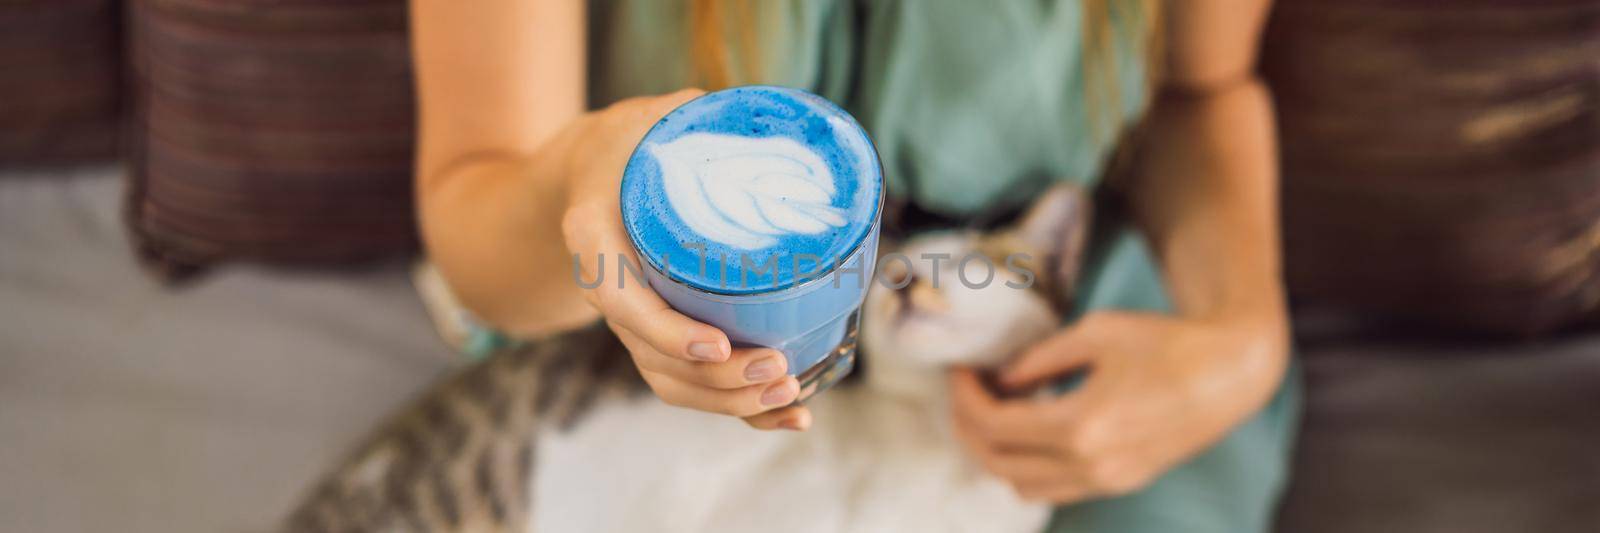 Young woman having a mediterranean breakfast seated at sofa and with her cat and drinks Trendy drink: Blue latte. Hot butterfly pea latte or blue spirulina latte. BANNER, LONG FORMAT